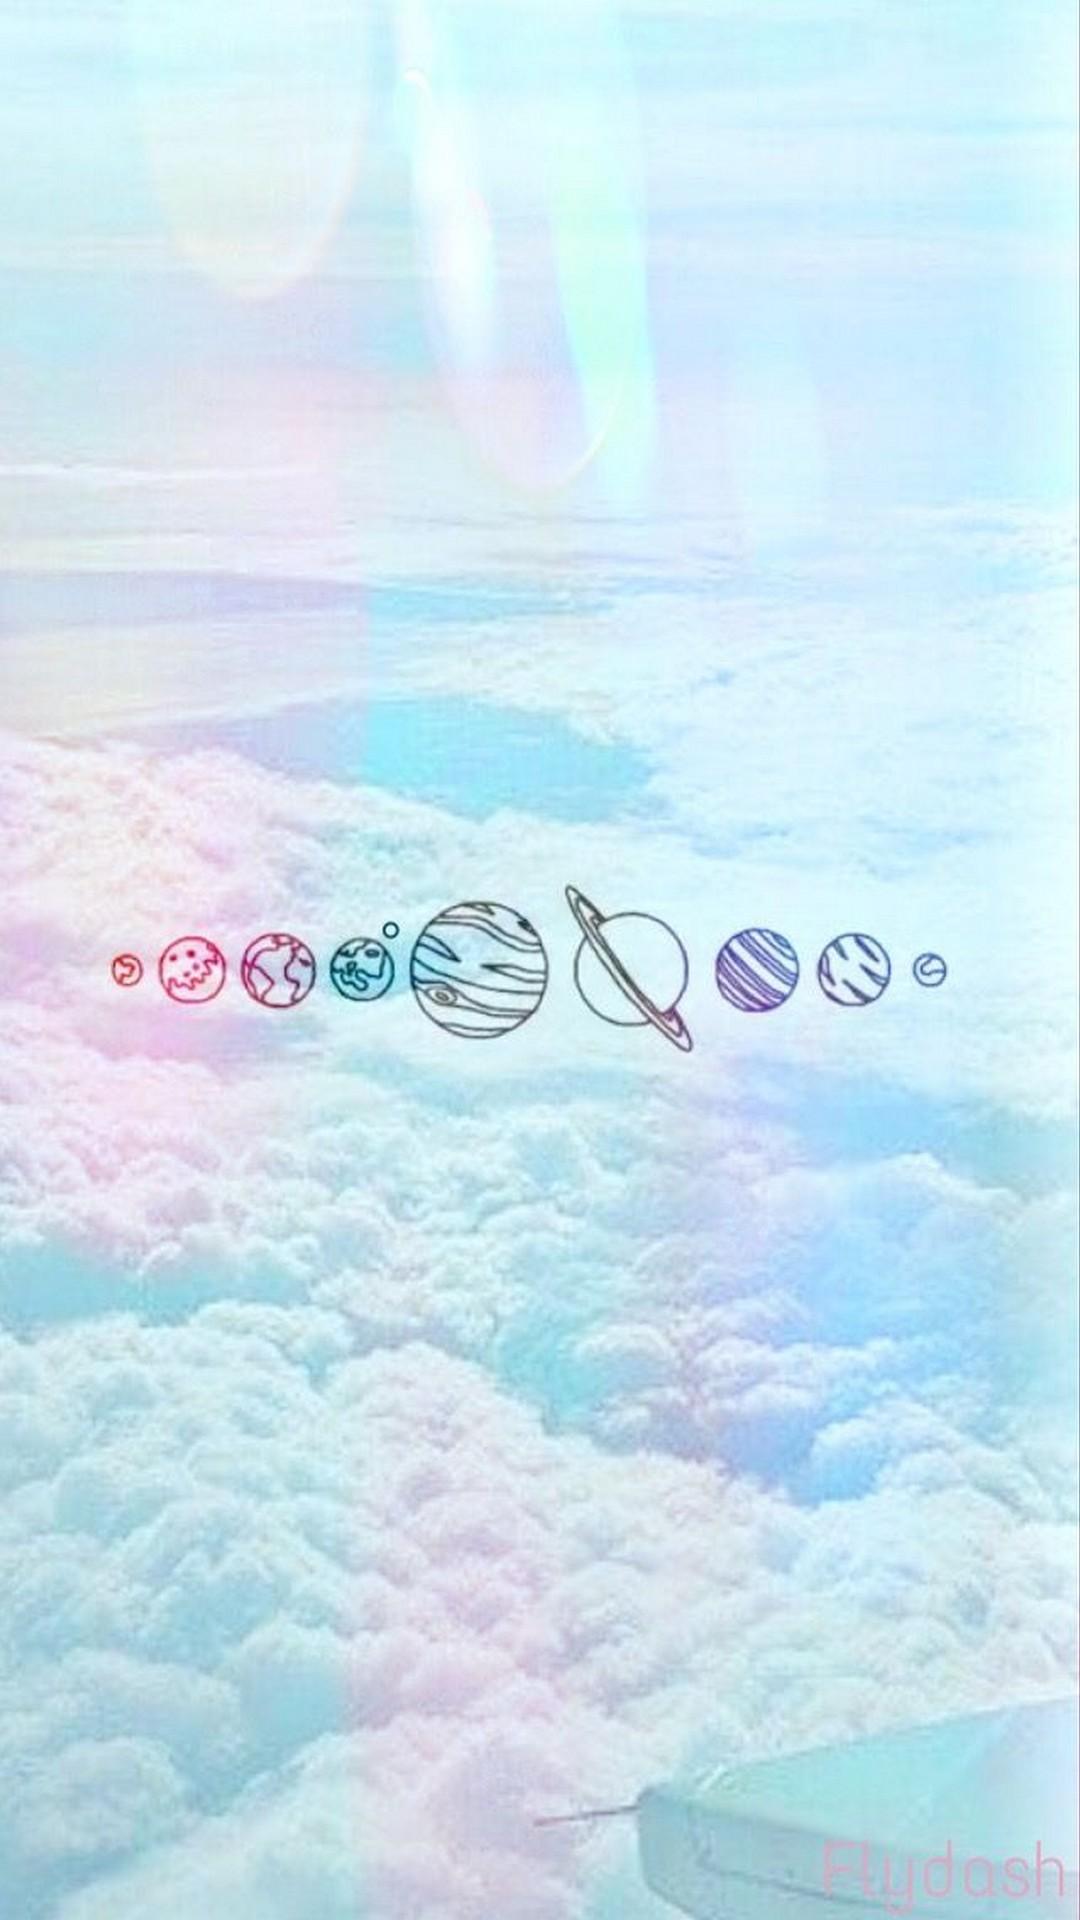 A plane flying over the clouds with different symbols - Phone, cute iPhone, cool, teal, HD, couple, simple